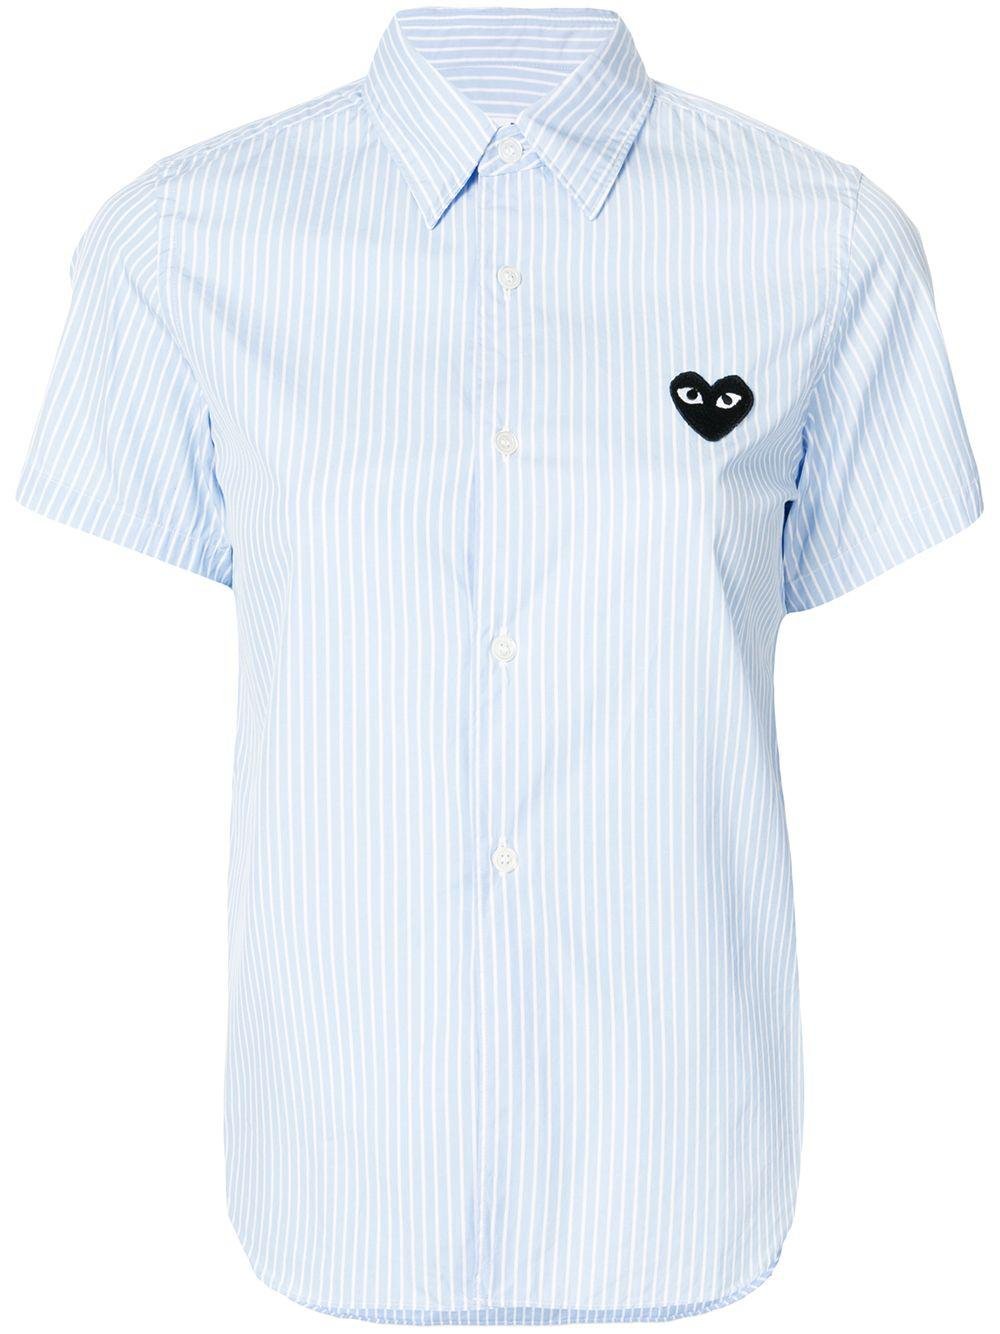 striped-print short-sleeved shirt by COMME DES GARCONS